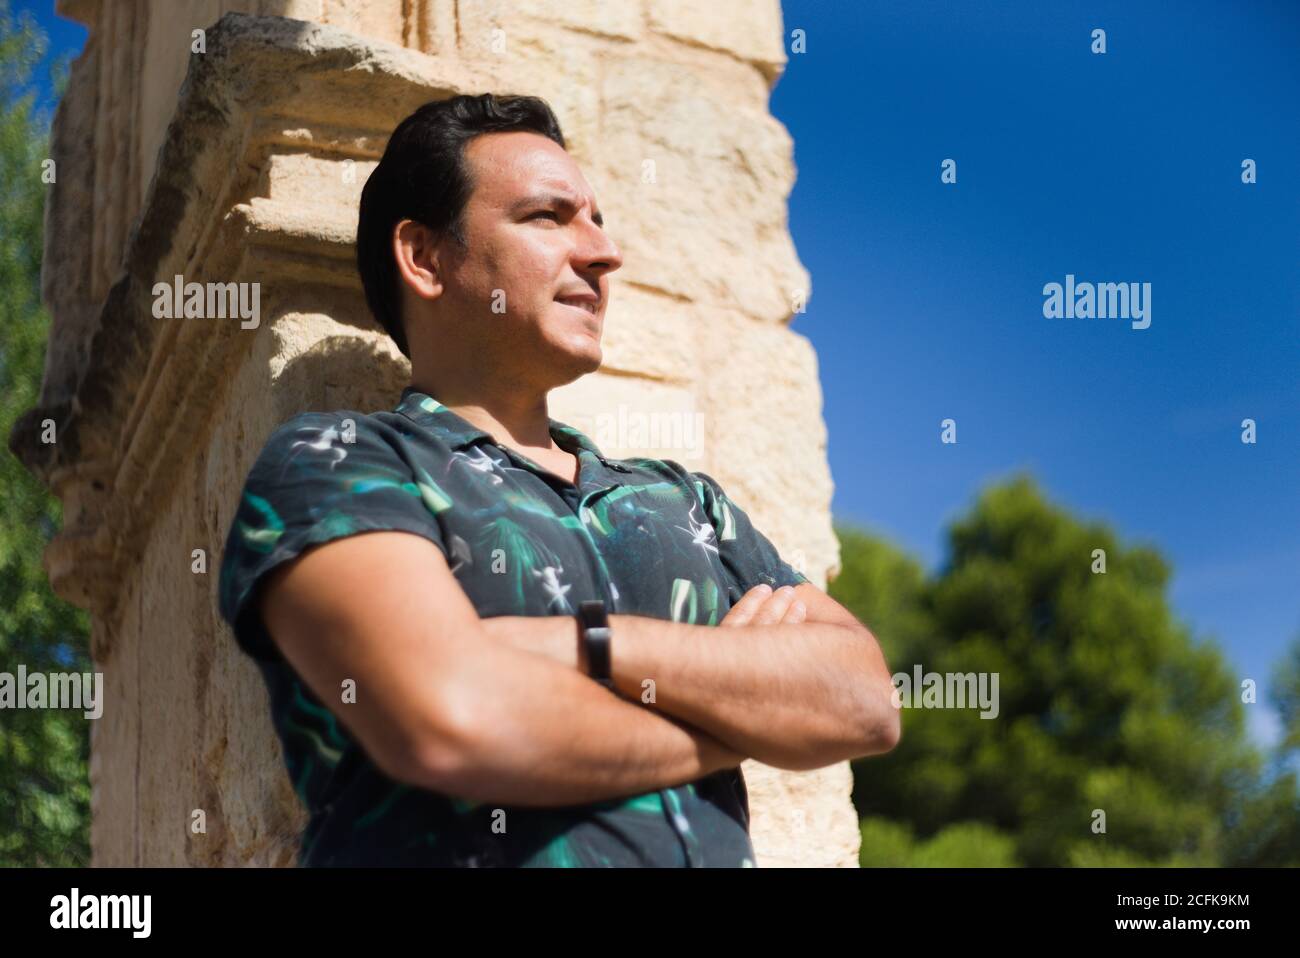 Man with positive and thoughtful attitude in an outdoor location. Stock Photo